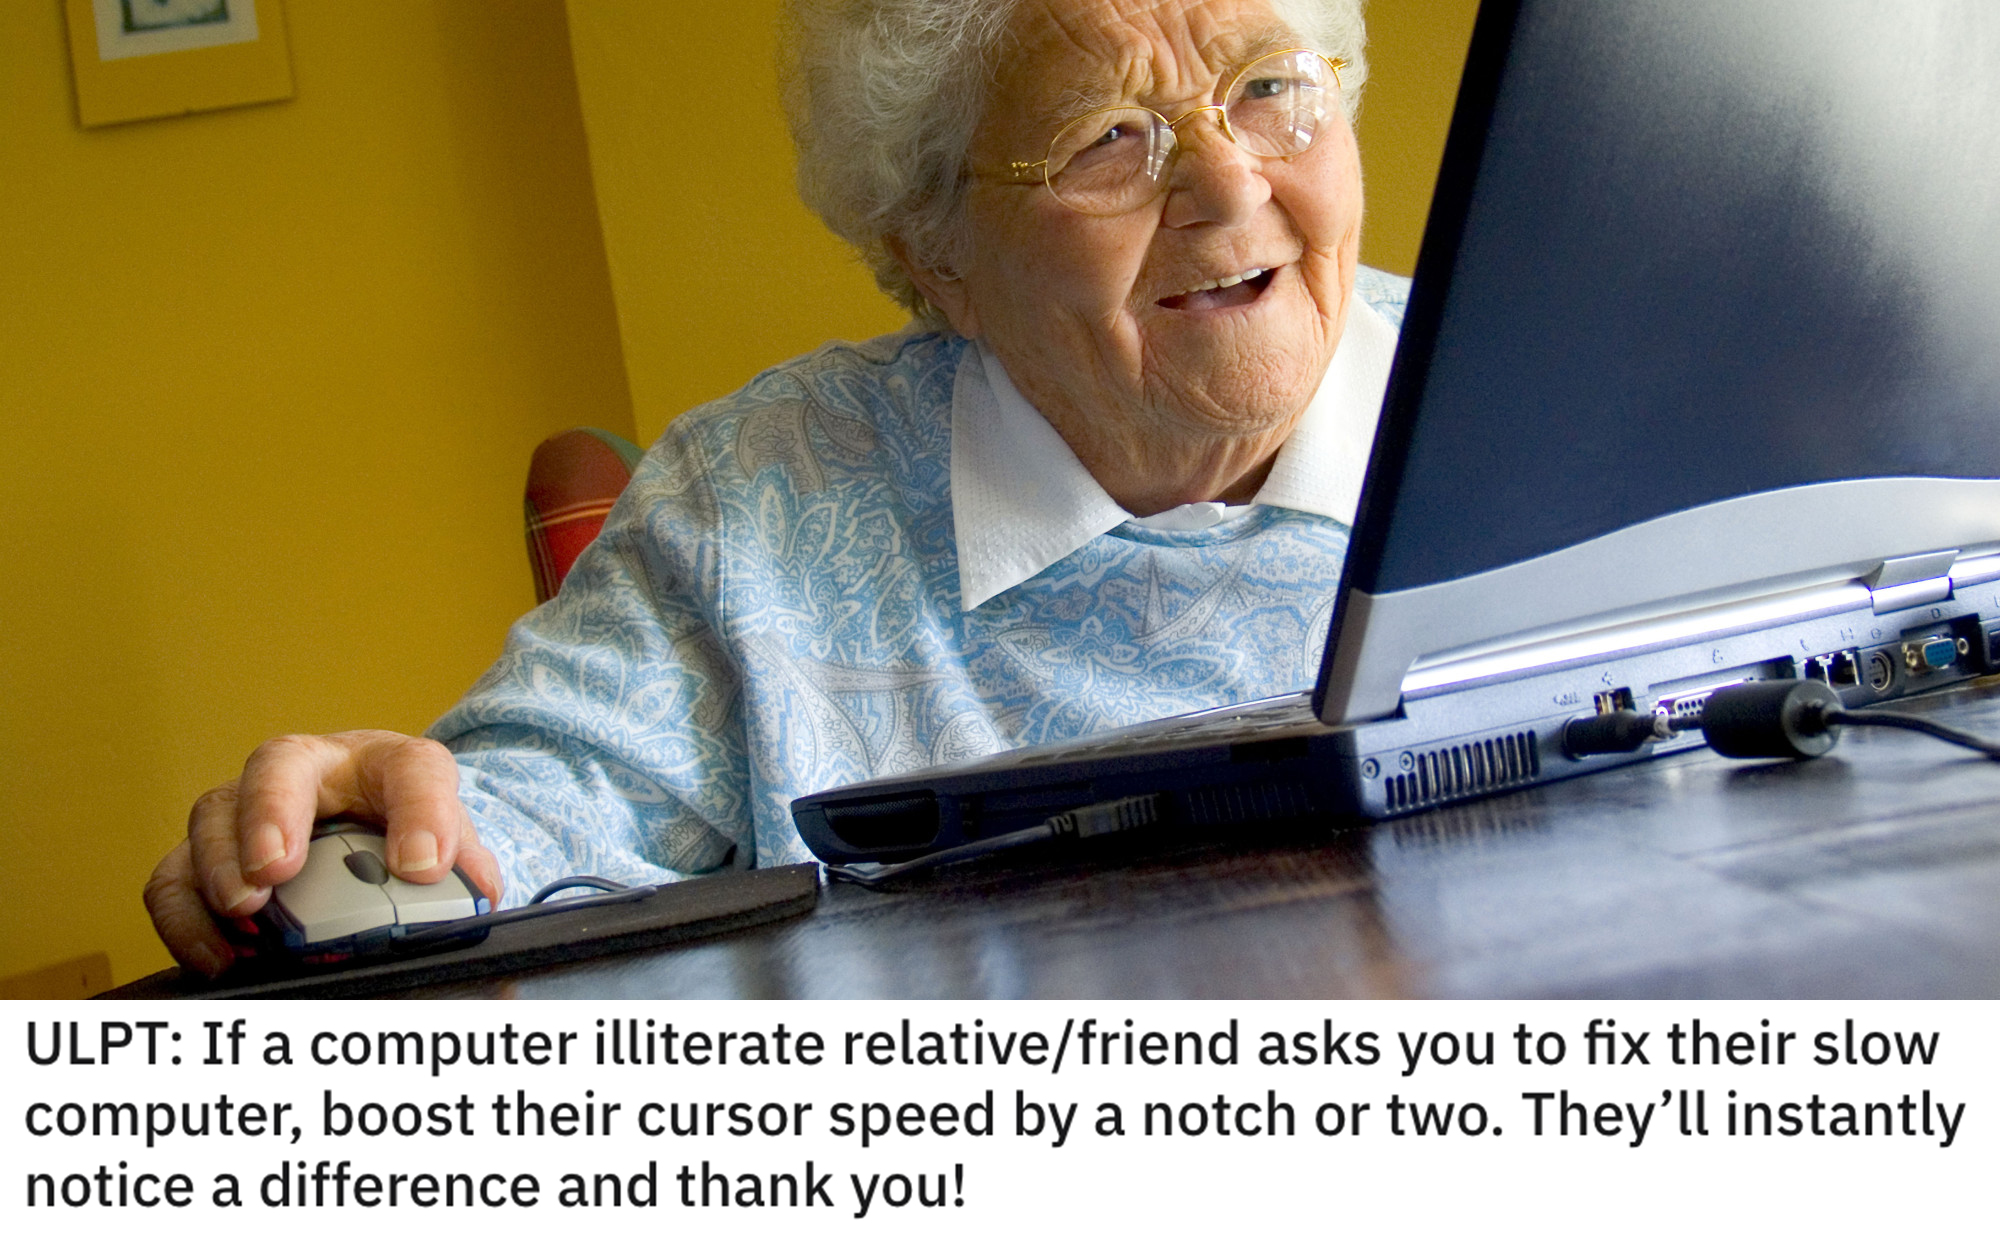 life hacks - If a computer illiterate relative/friend asks you to fix their slow computer, boost their cursor speed by a notch or two. They'll instantly notice a difference and thank you!